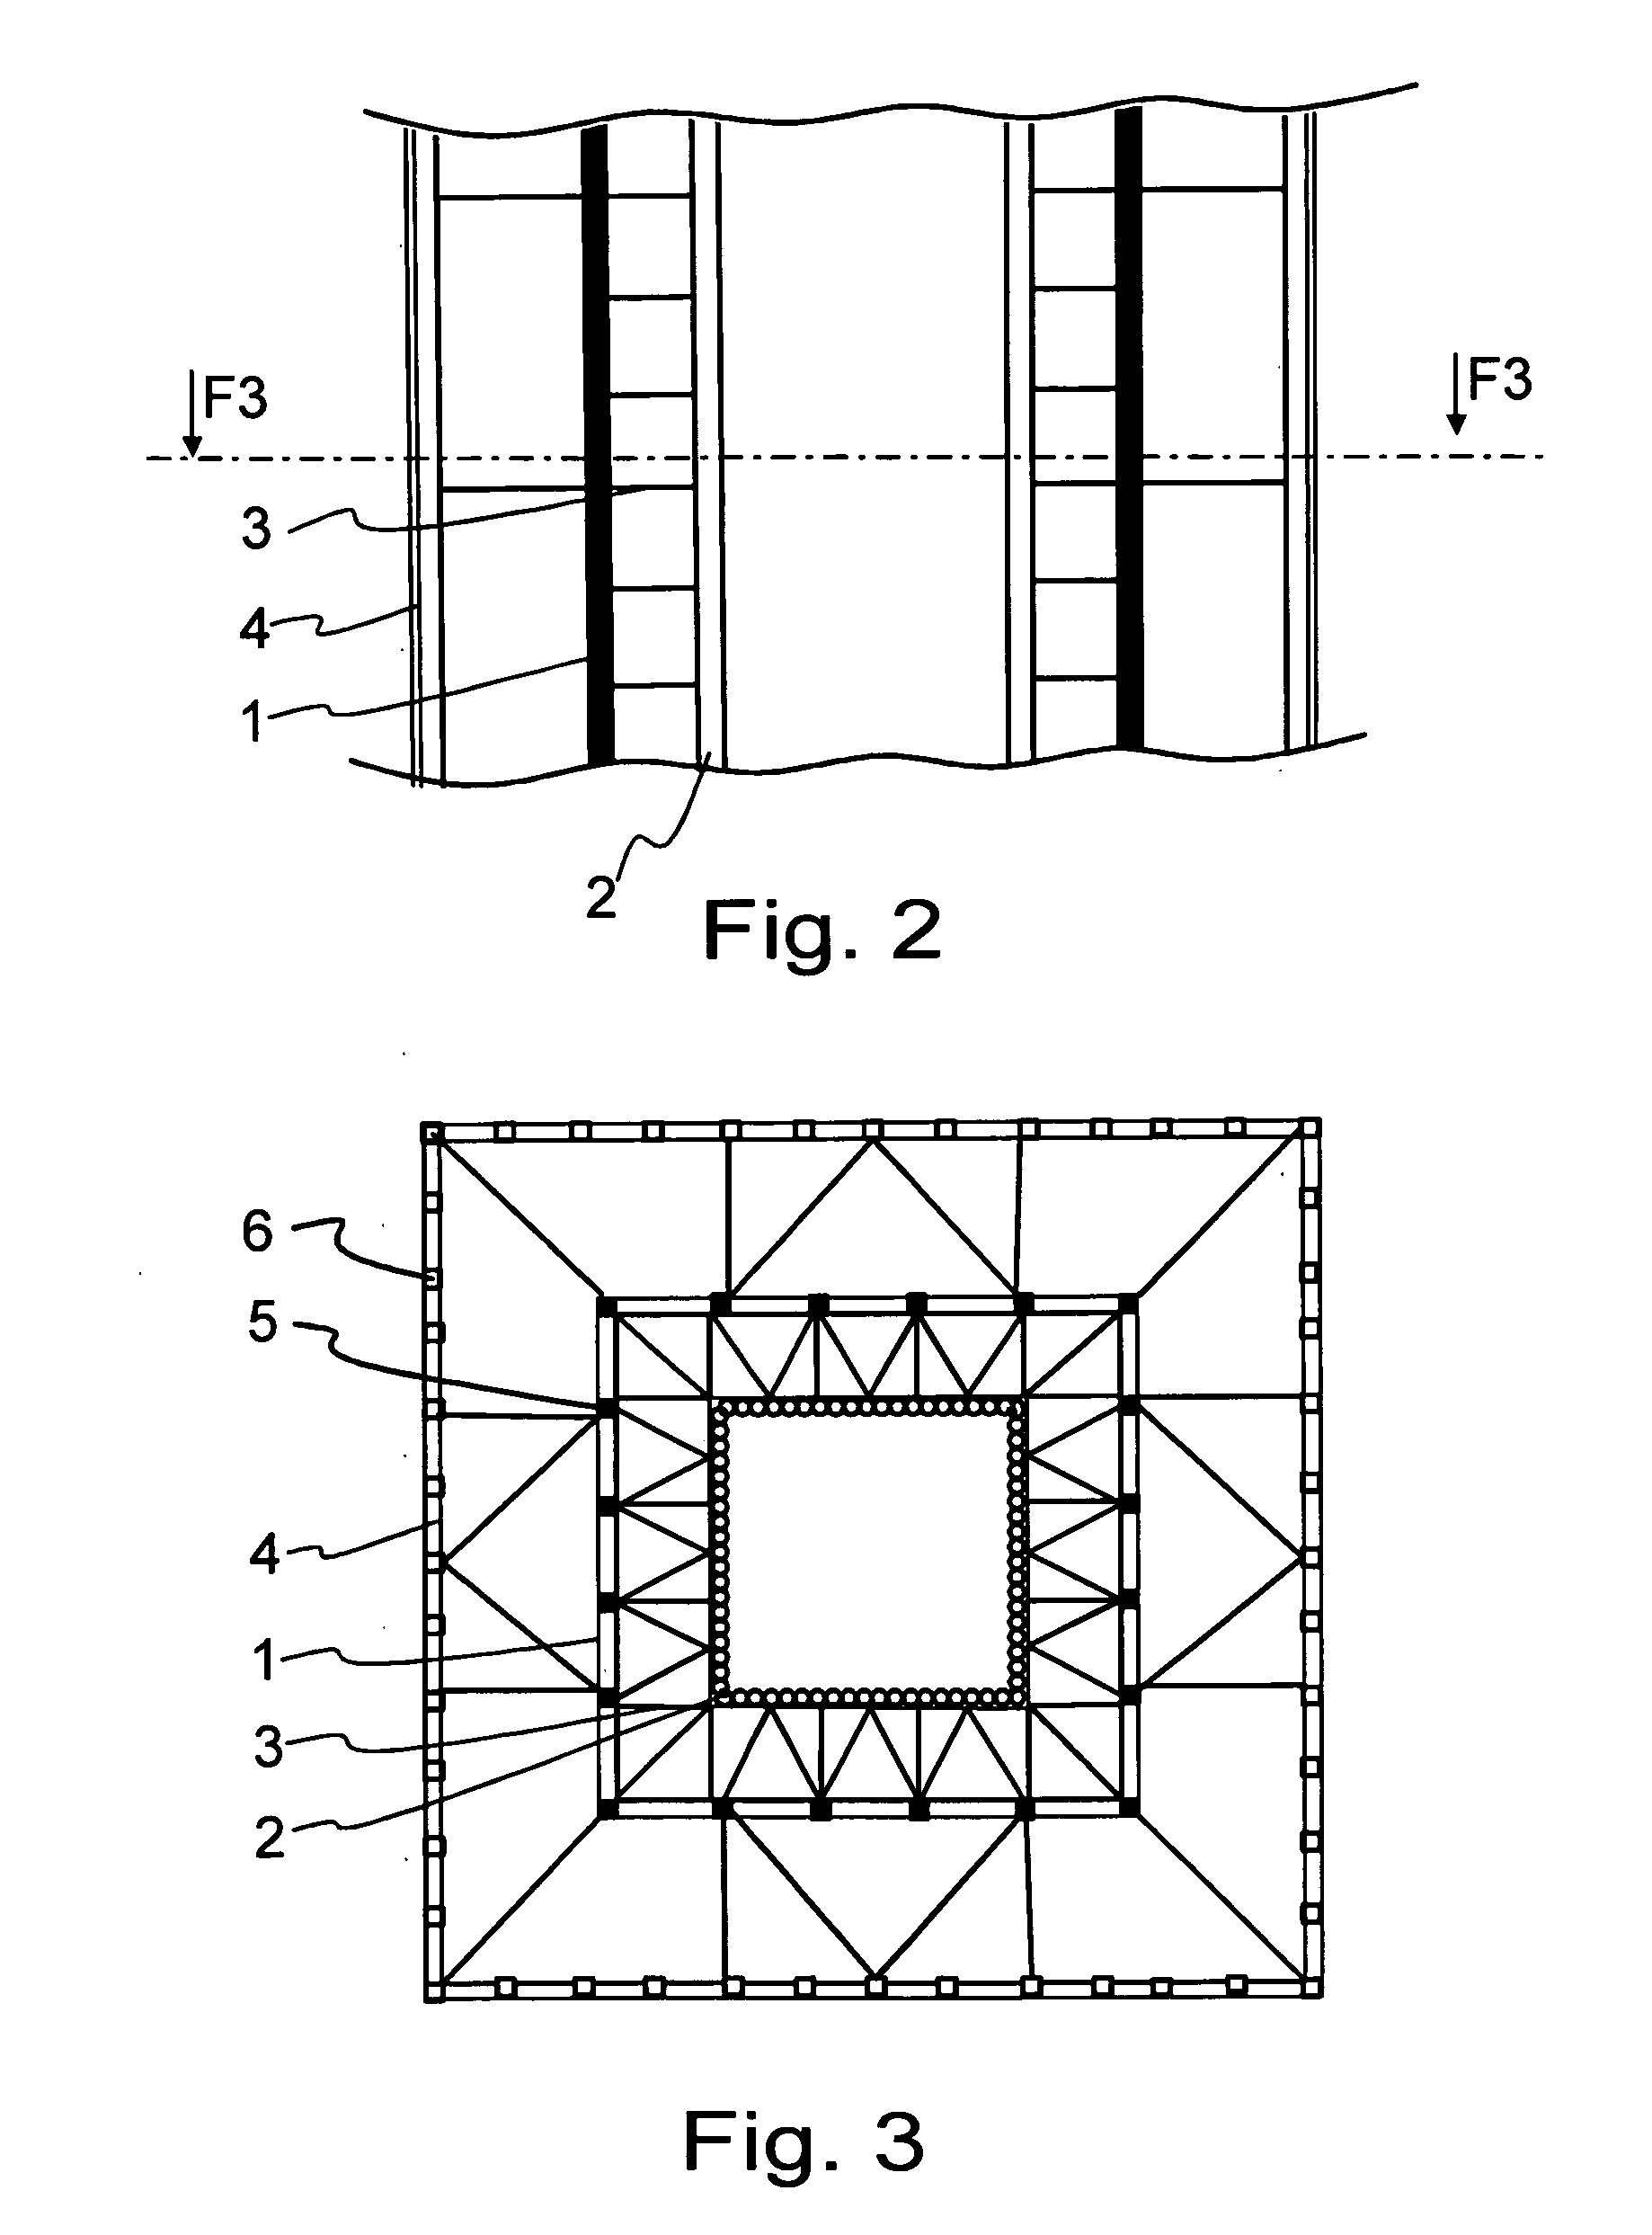 Boiler plant, a support structure and a method for supporting the walls of a steam boiler of a boiler plant